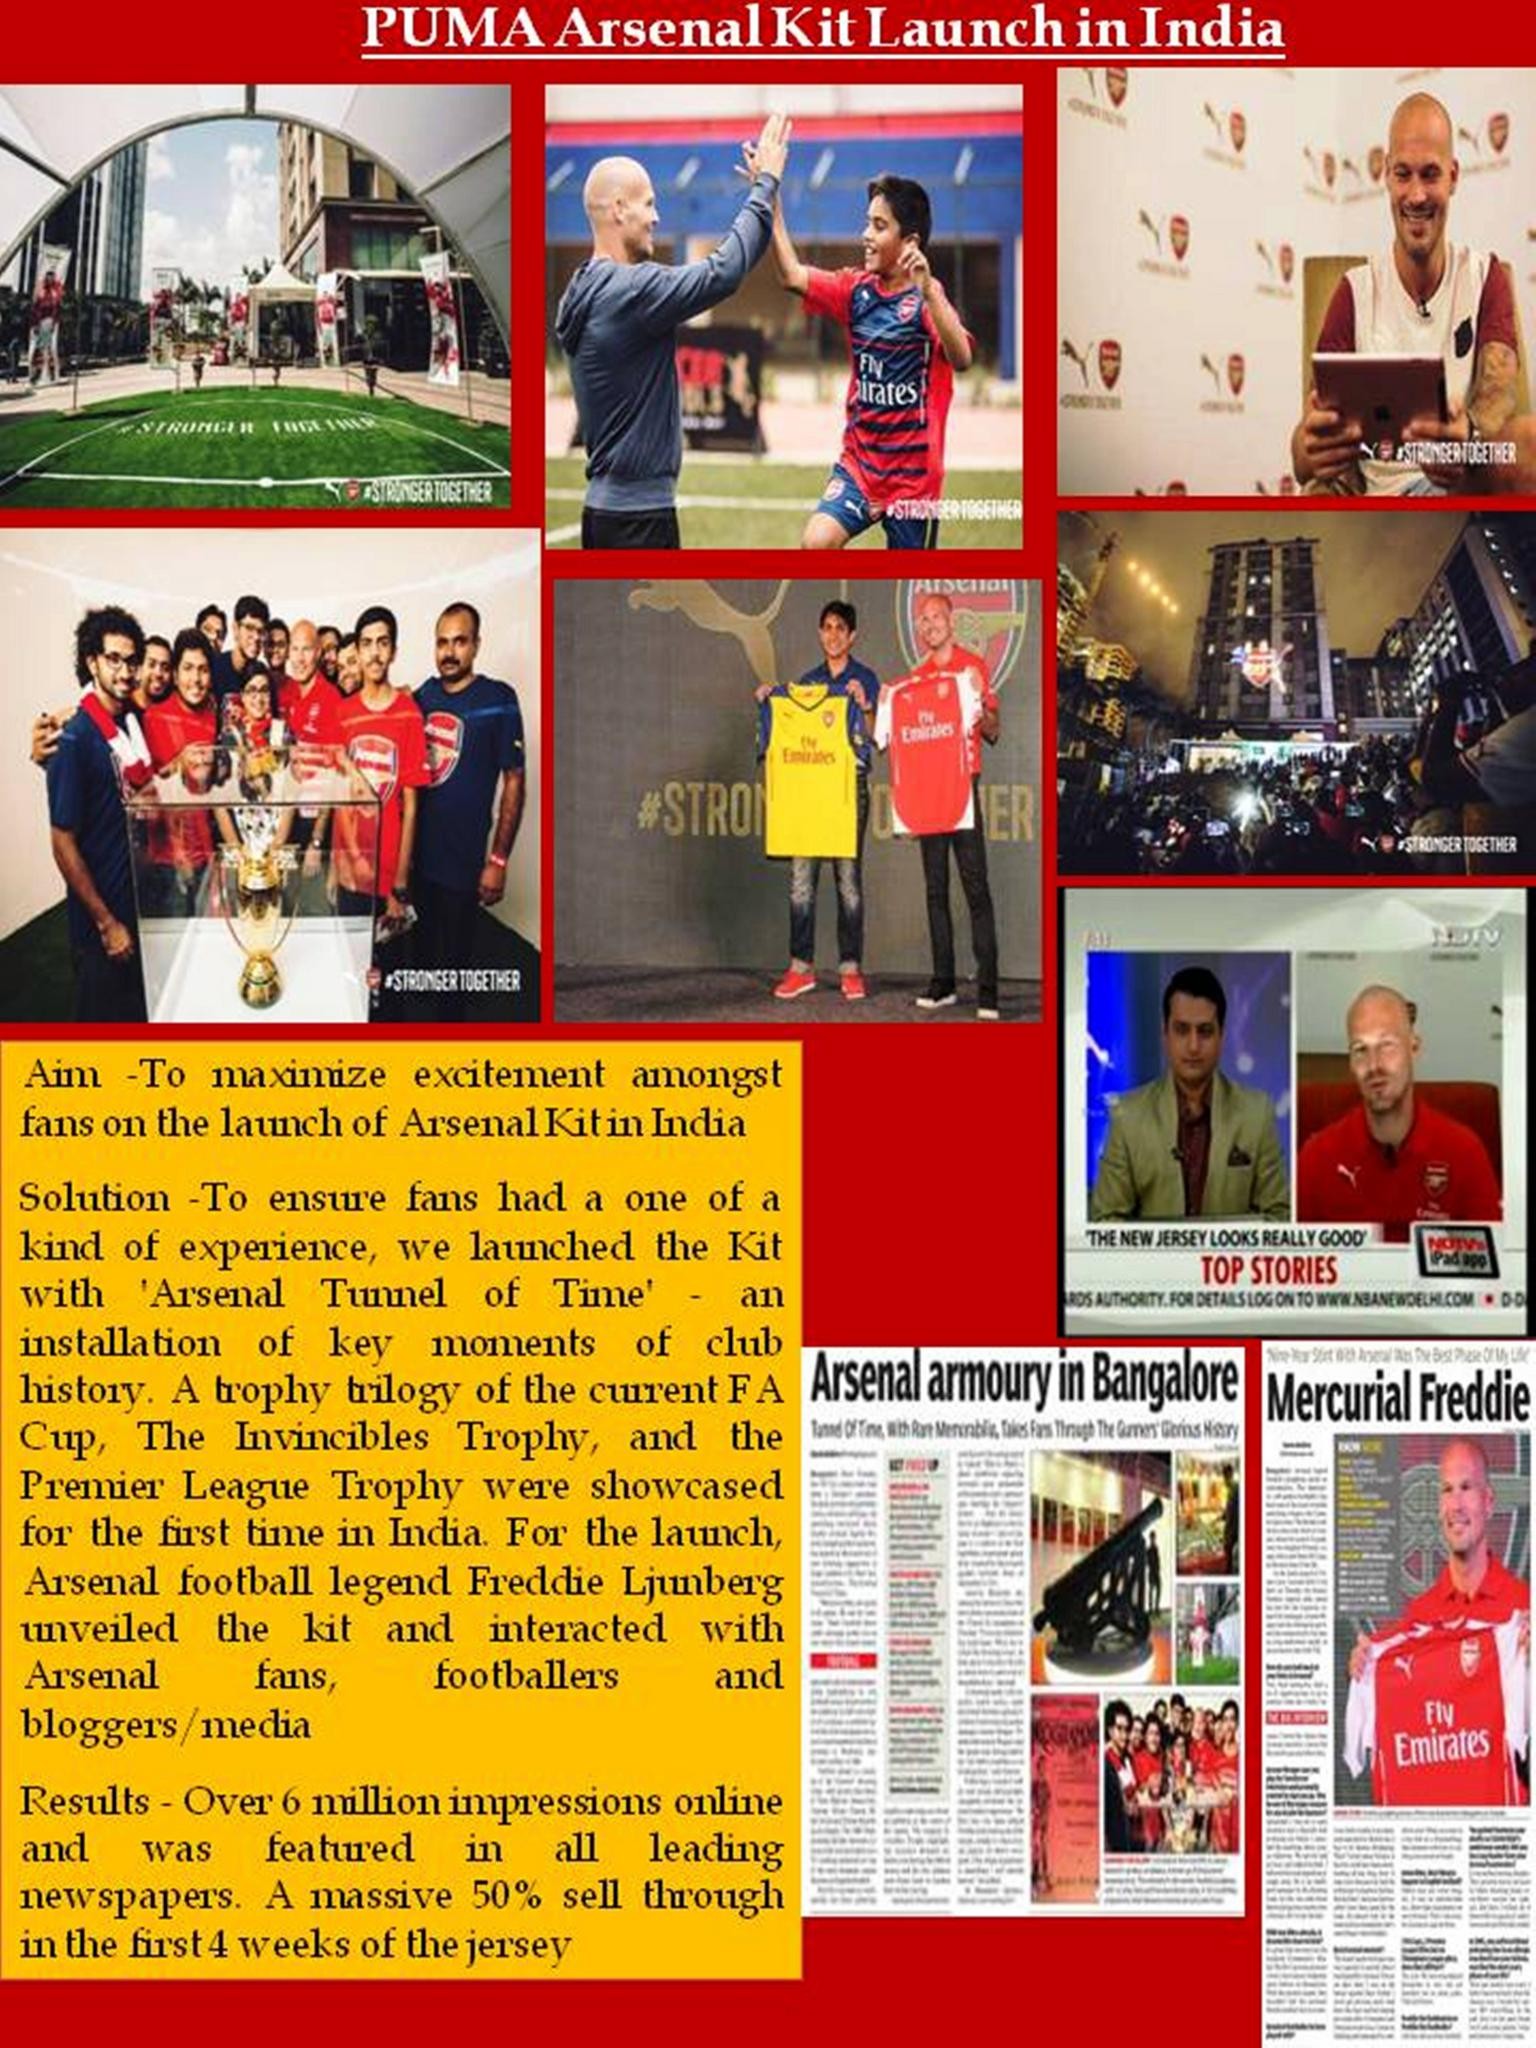 PUMA ARSENAL KIT LAUNCH IN INDIA